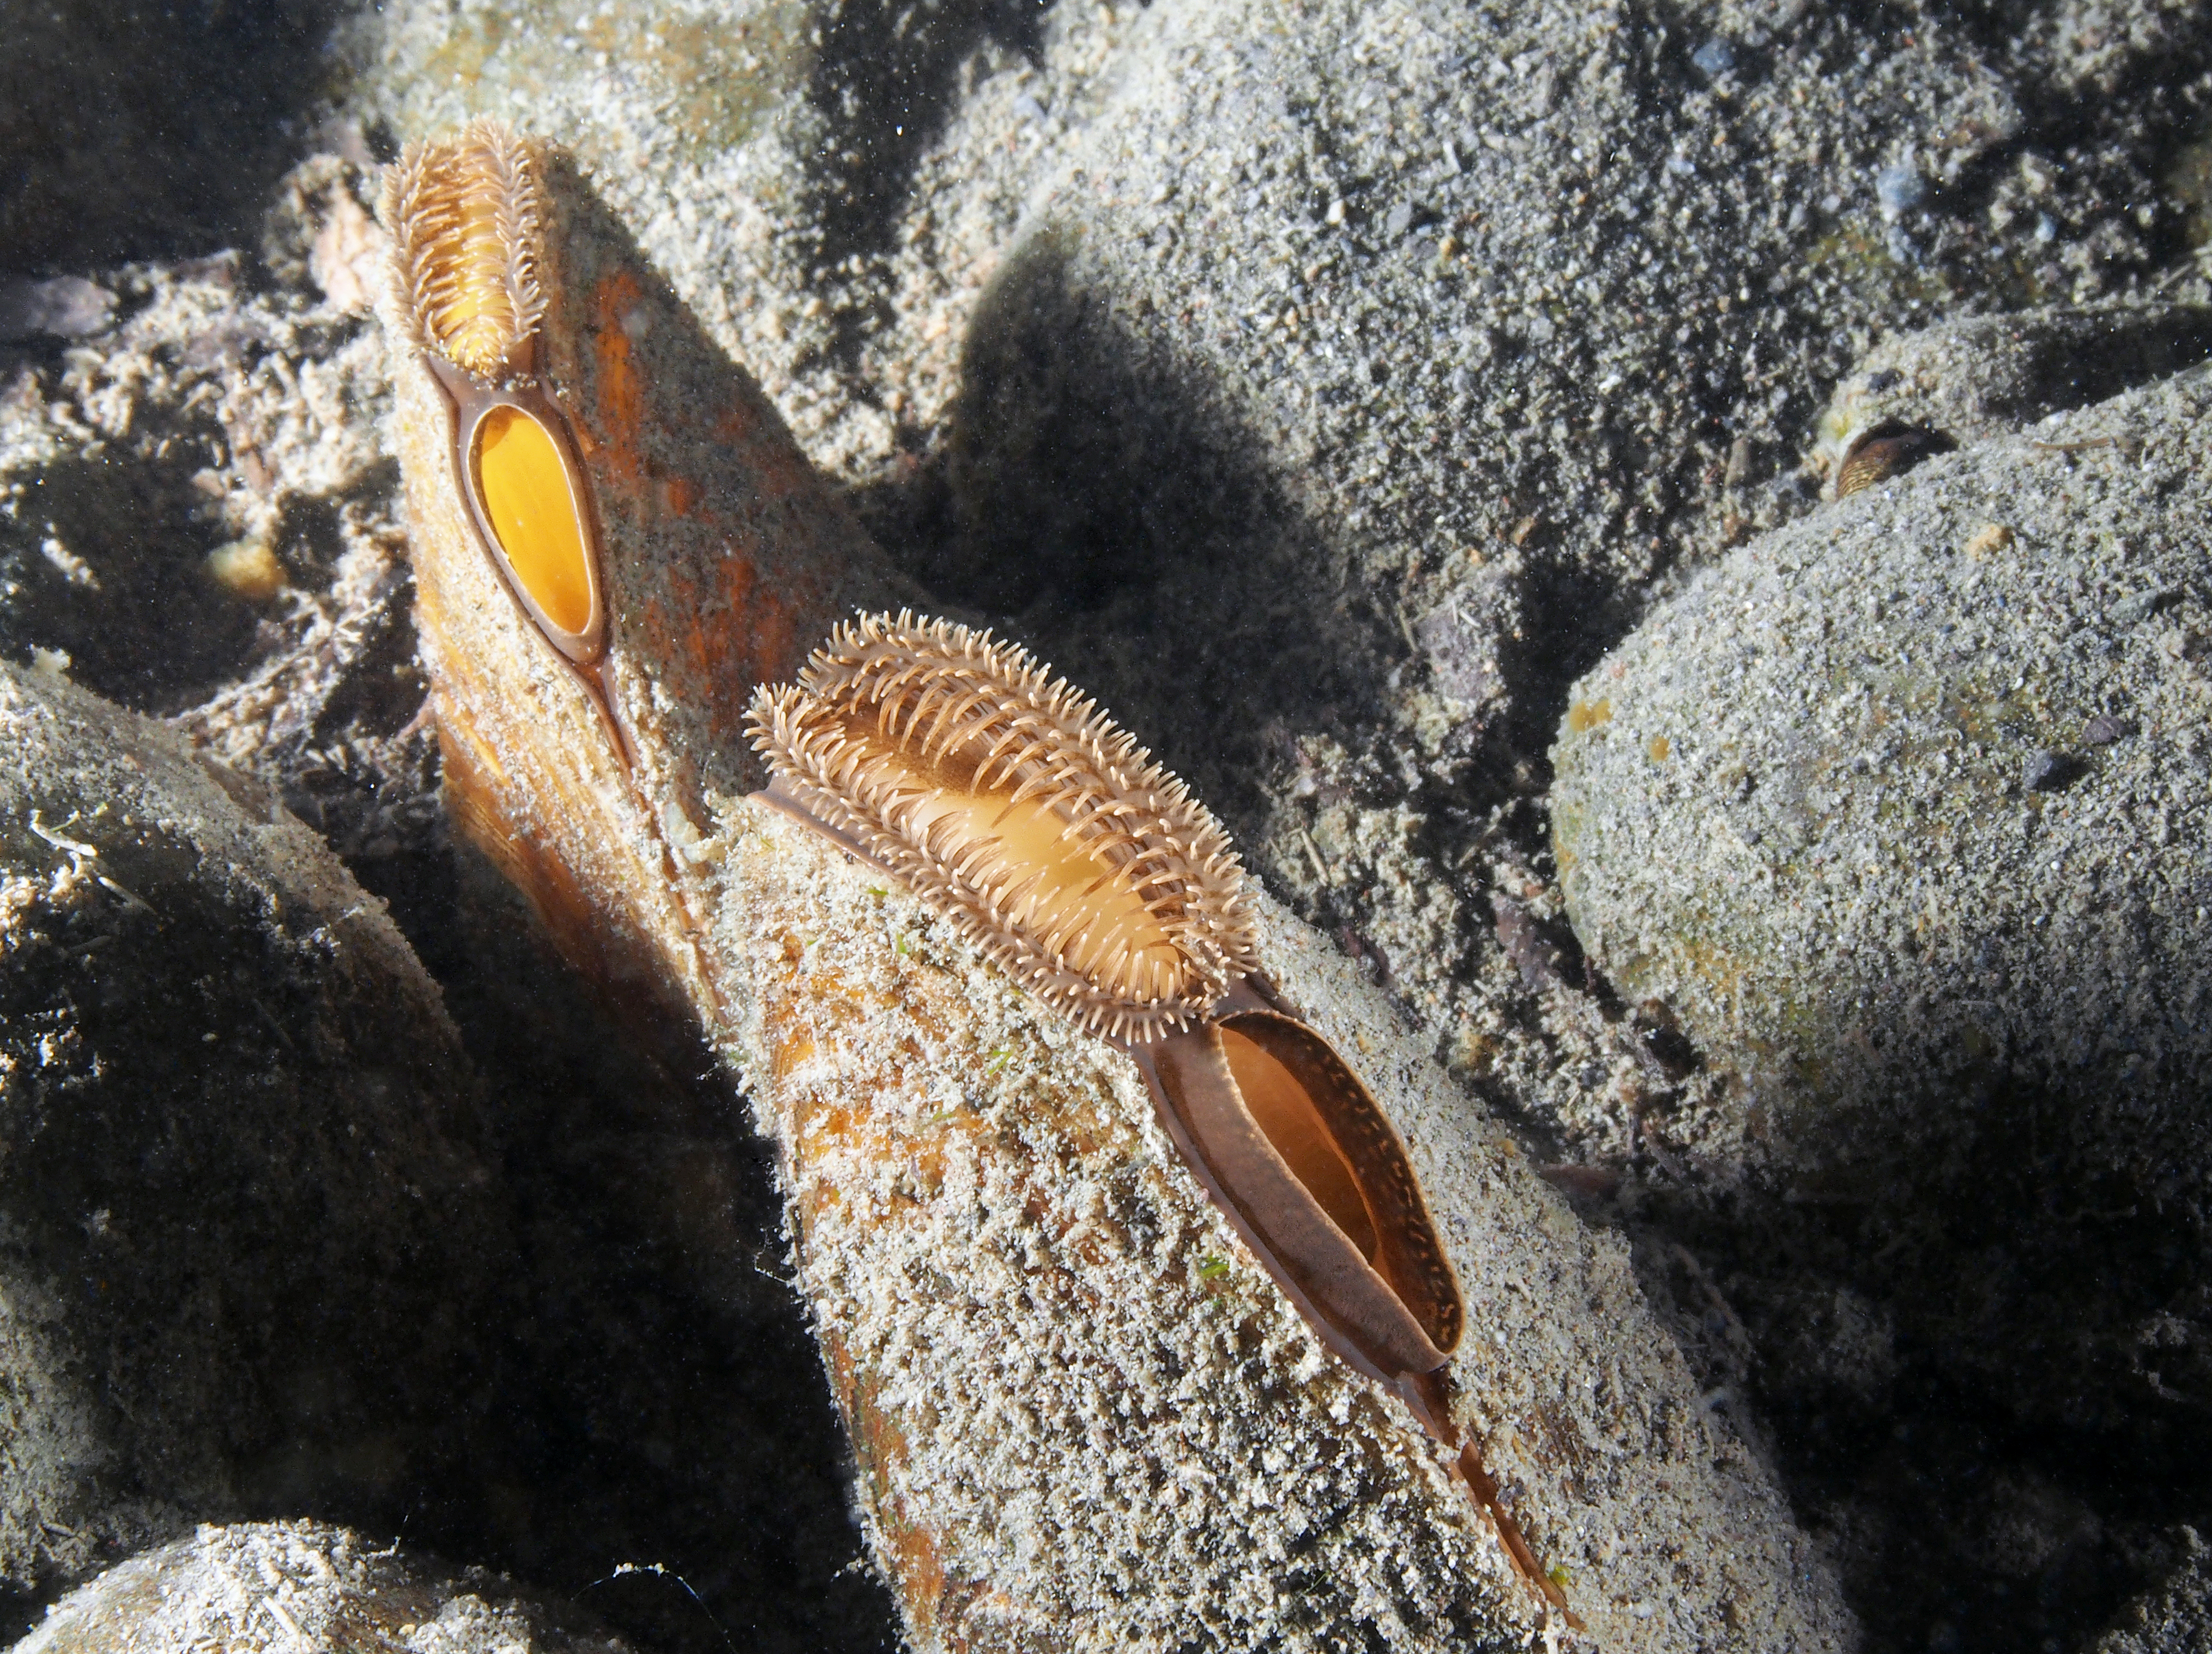 A gray-shelled freshwater mussel is shown in this crisp underwater photo.